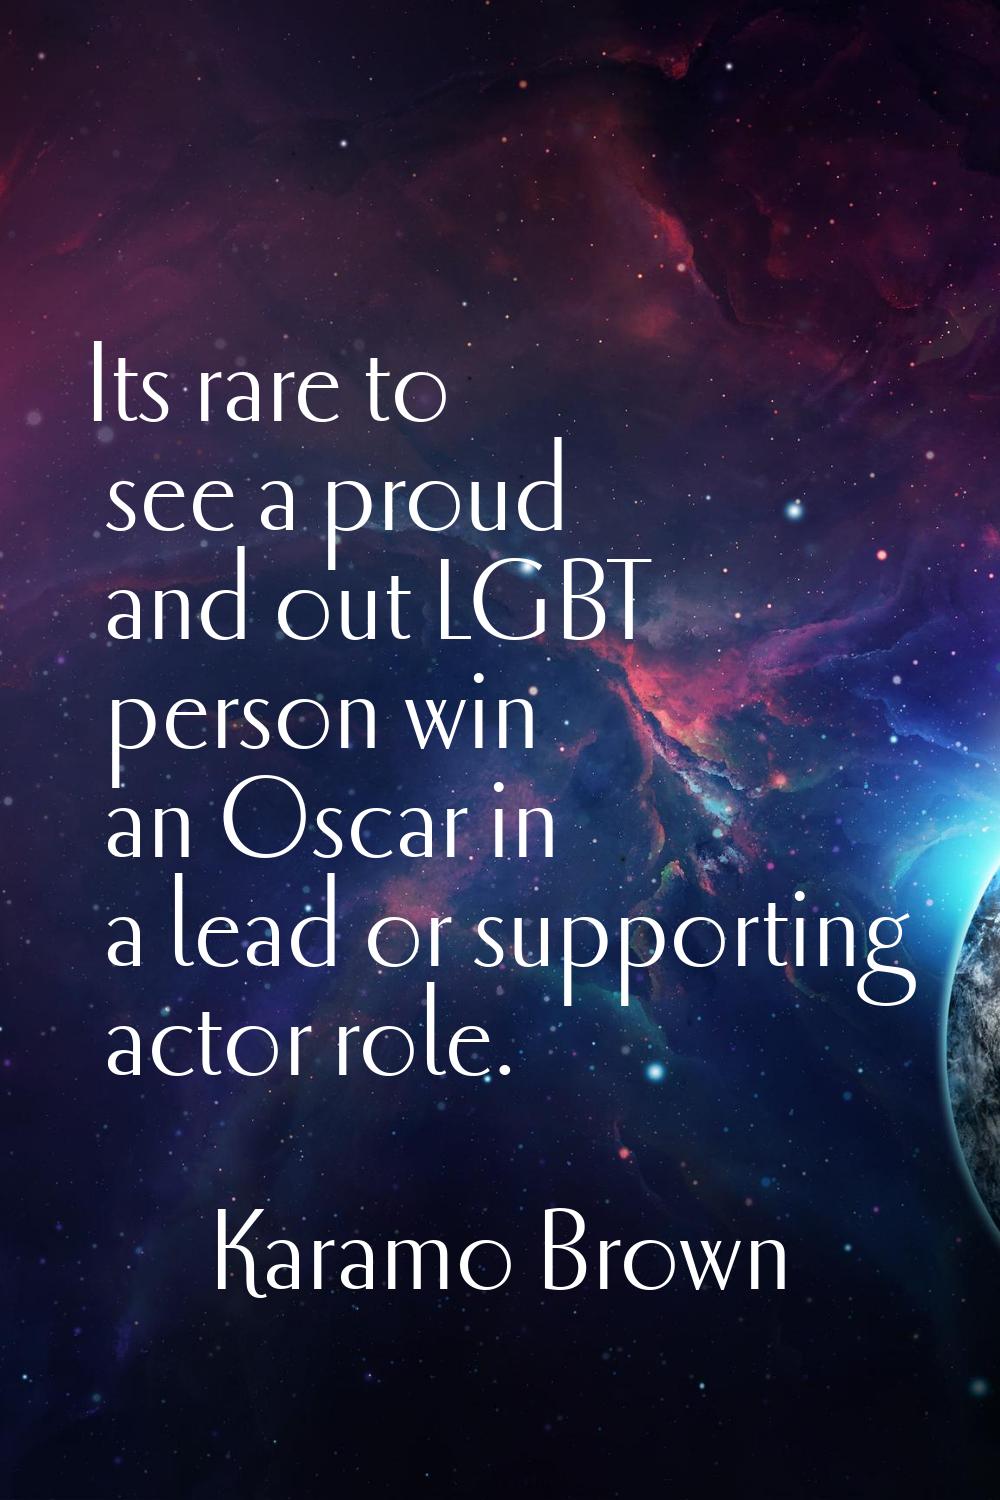 Its rare to see a proud and out LGBT person win an Oscar in a lead or supporting actor role.